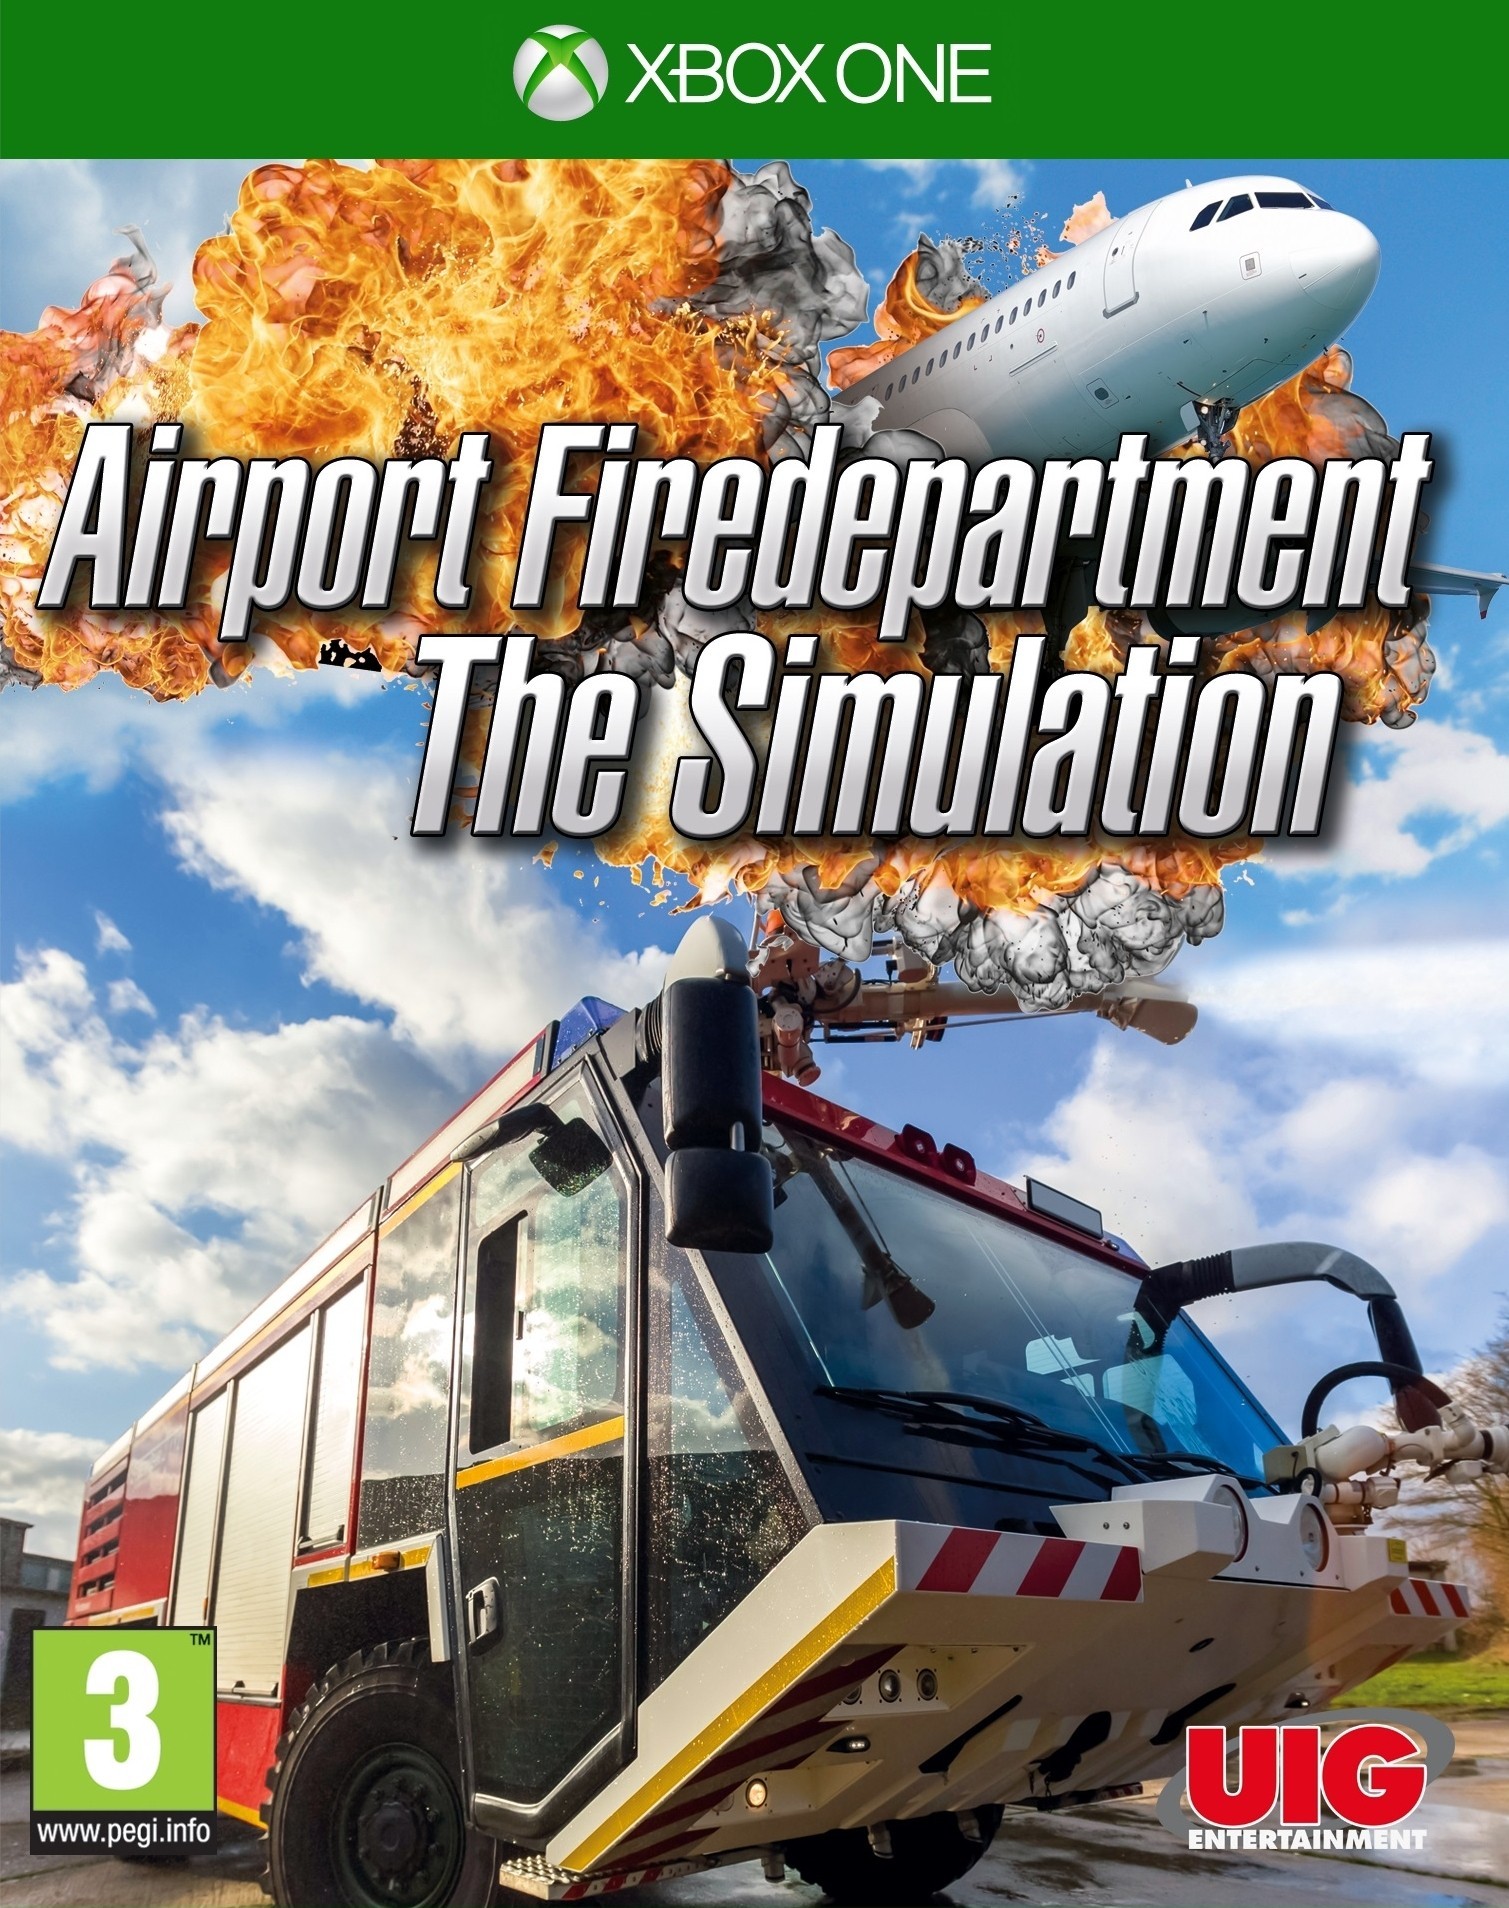 Airport Firedepartment: The Simulation  (Xbox One), UIG Entertainment